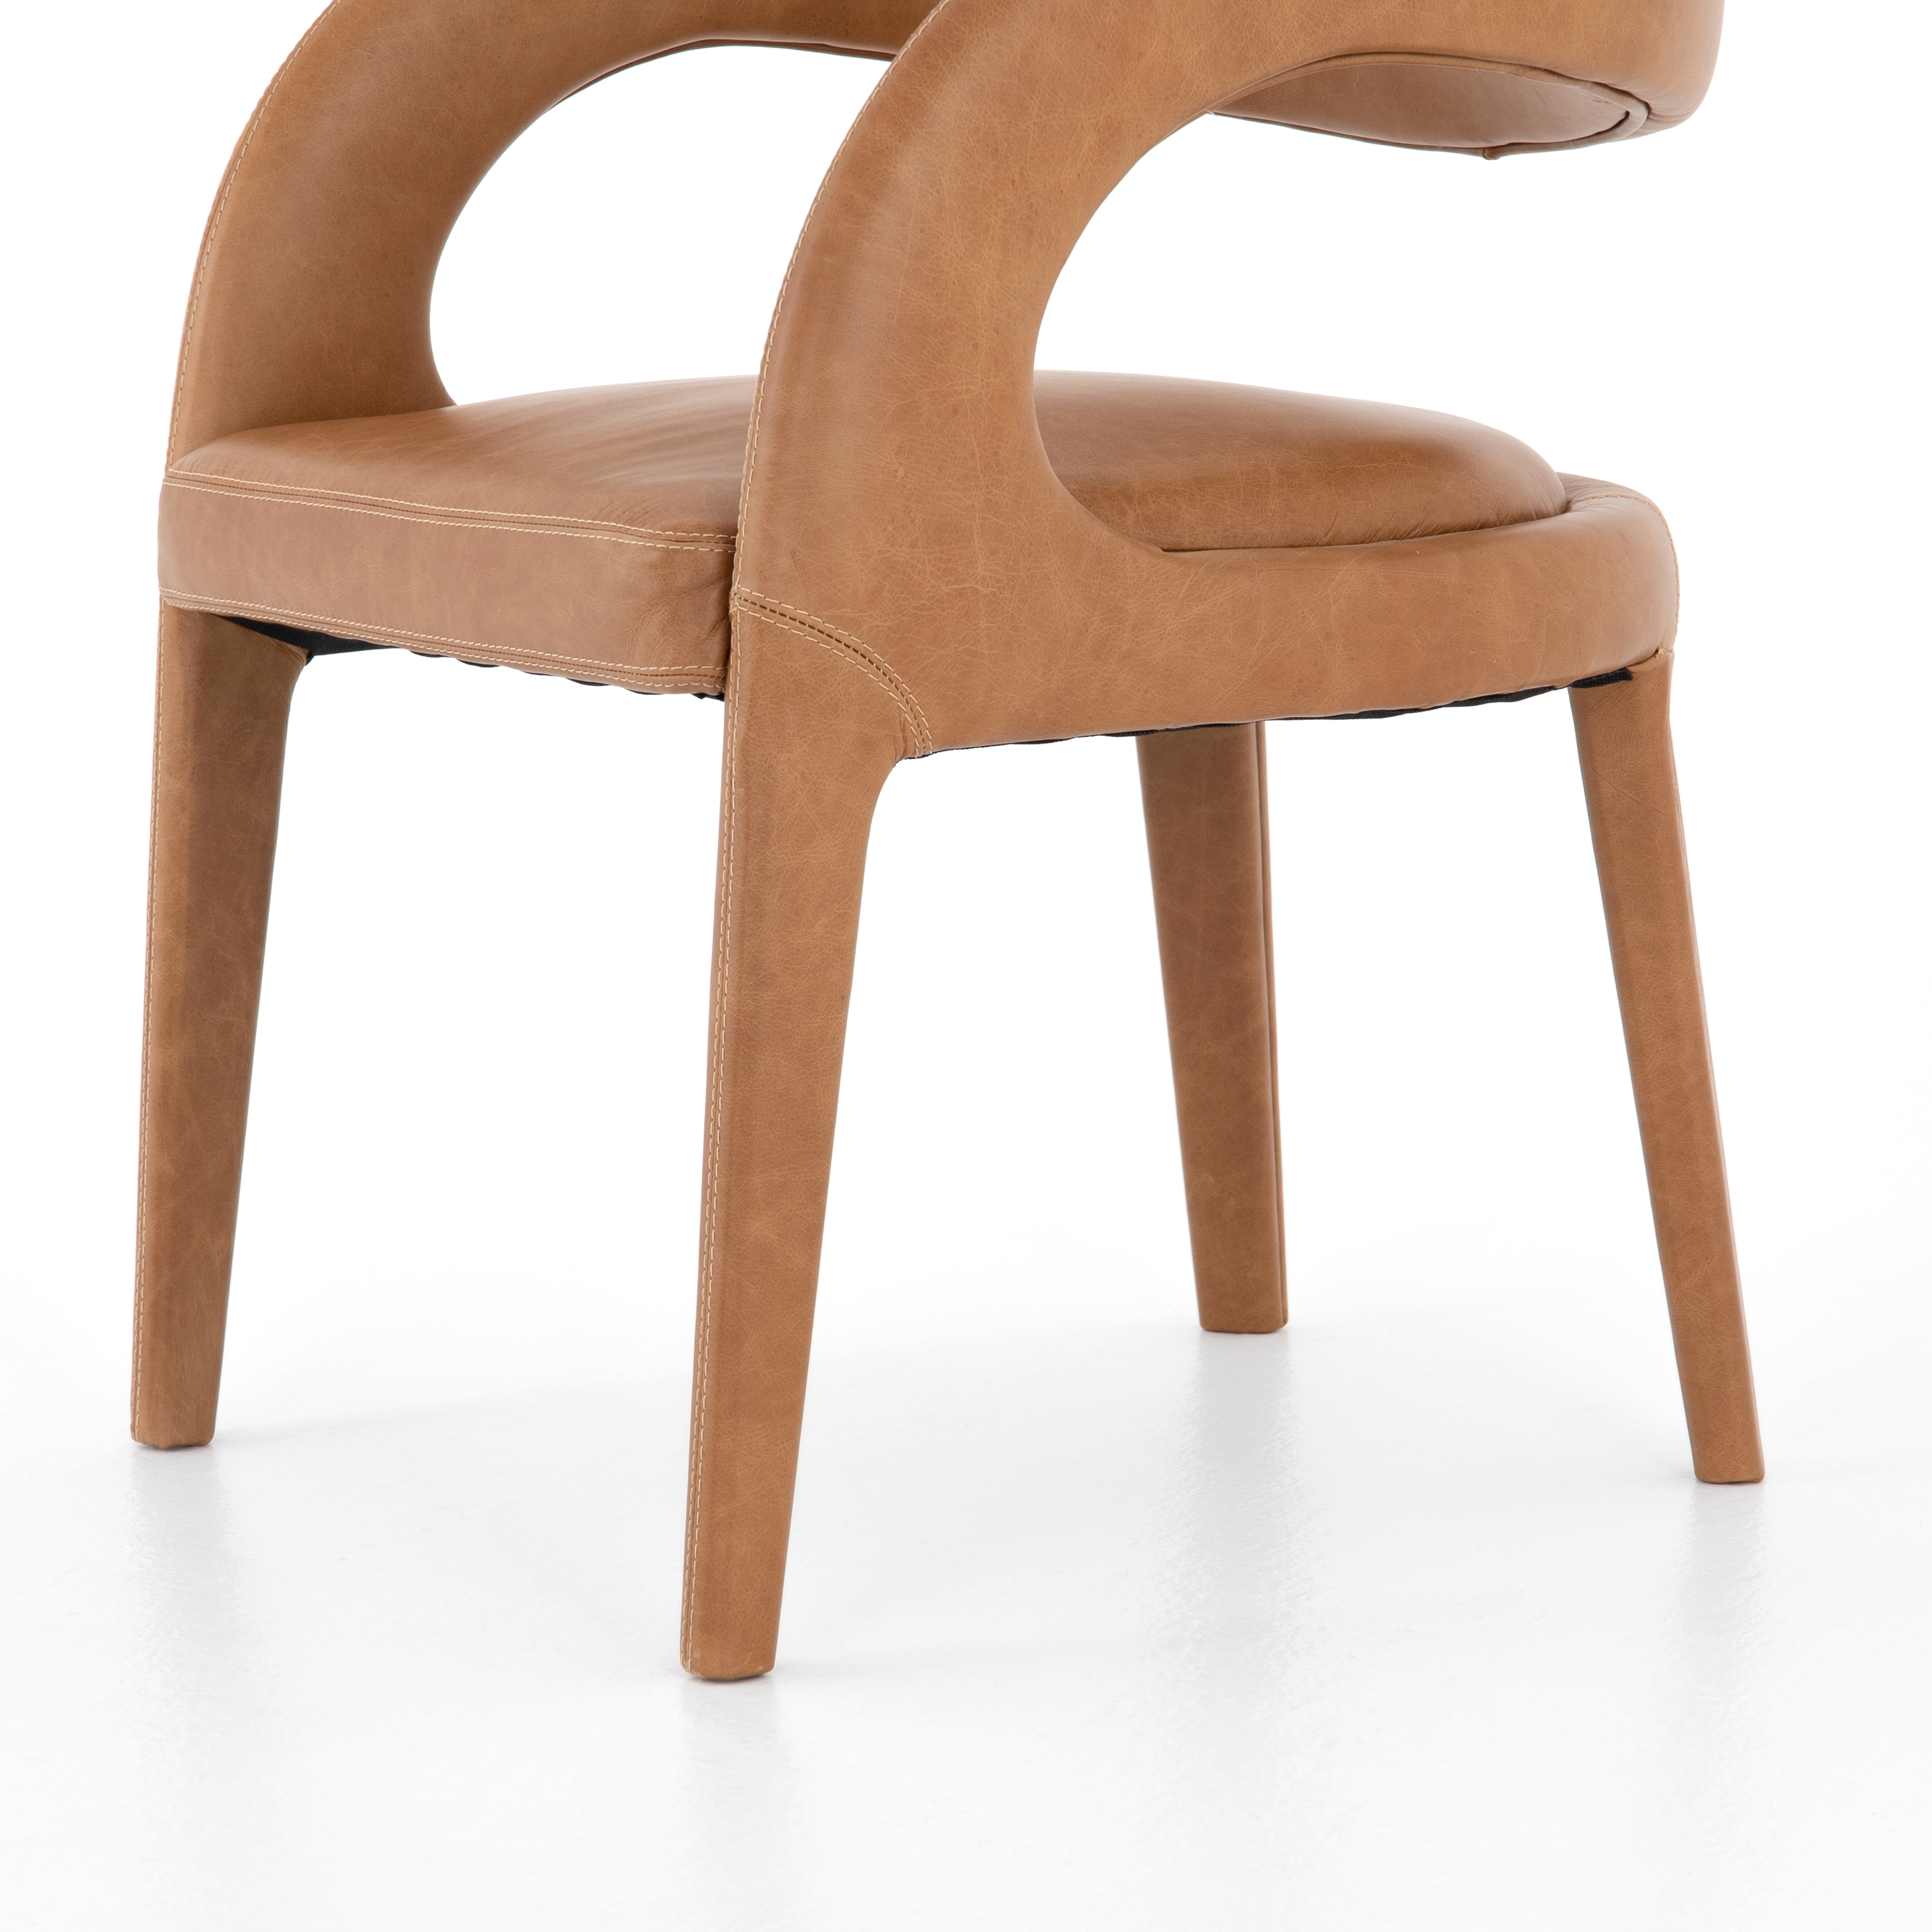 Hawkins Dining Chair-Butterscotch - Image 3